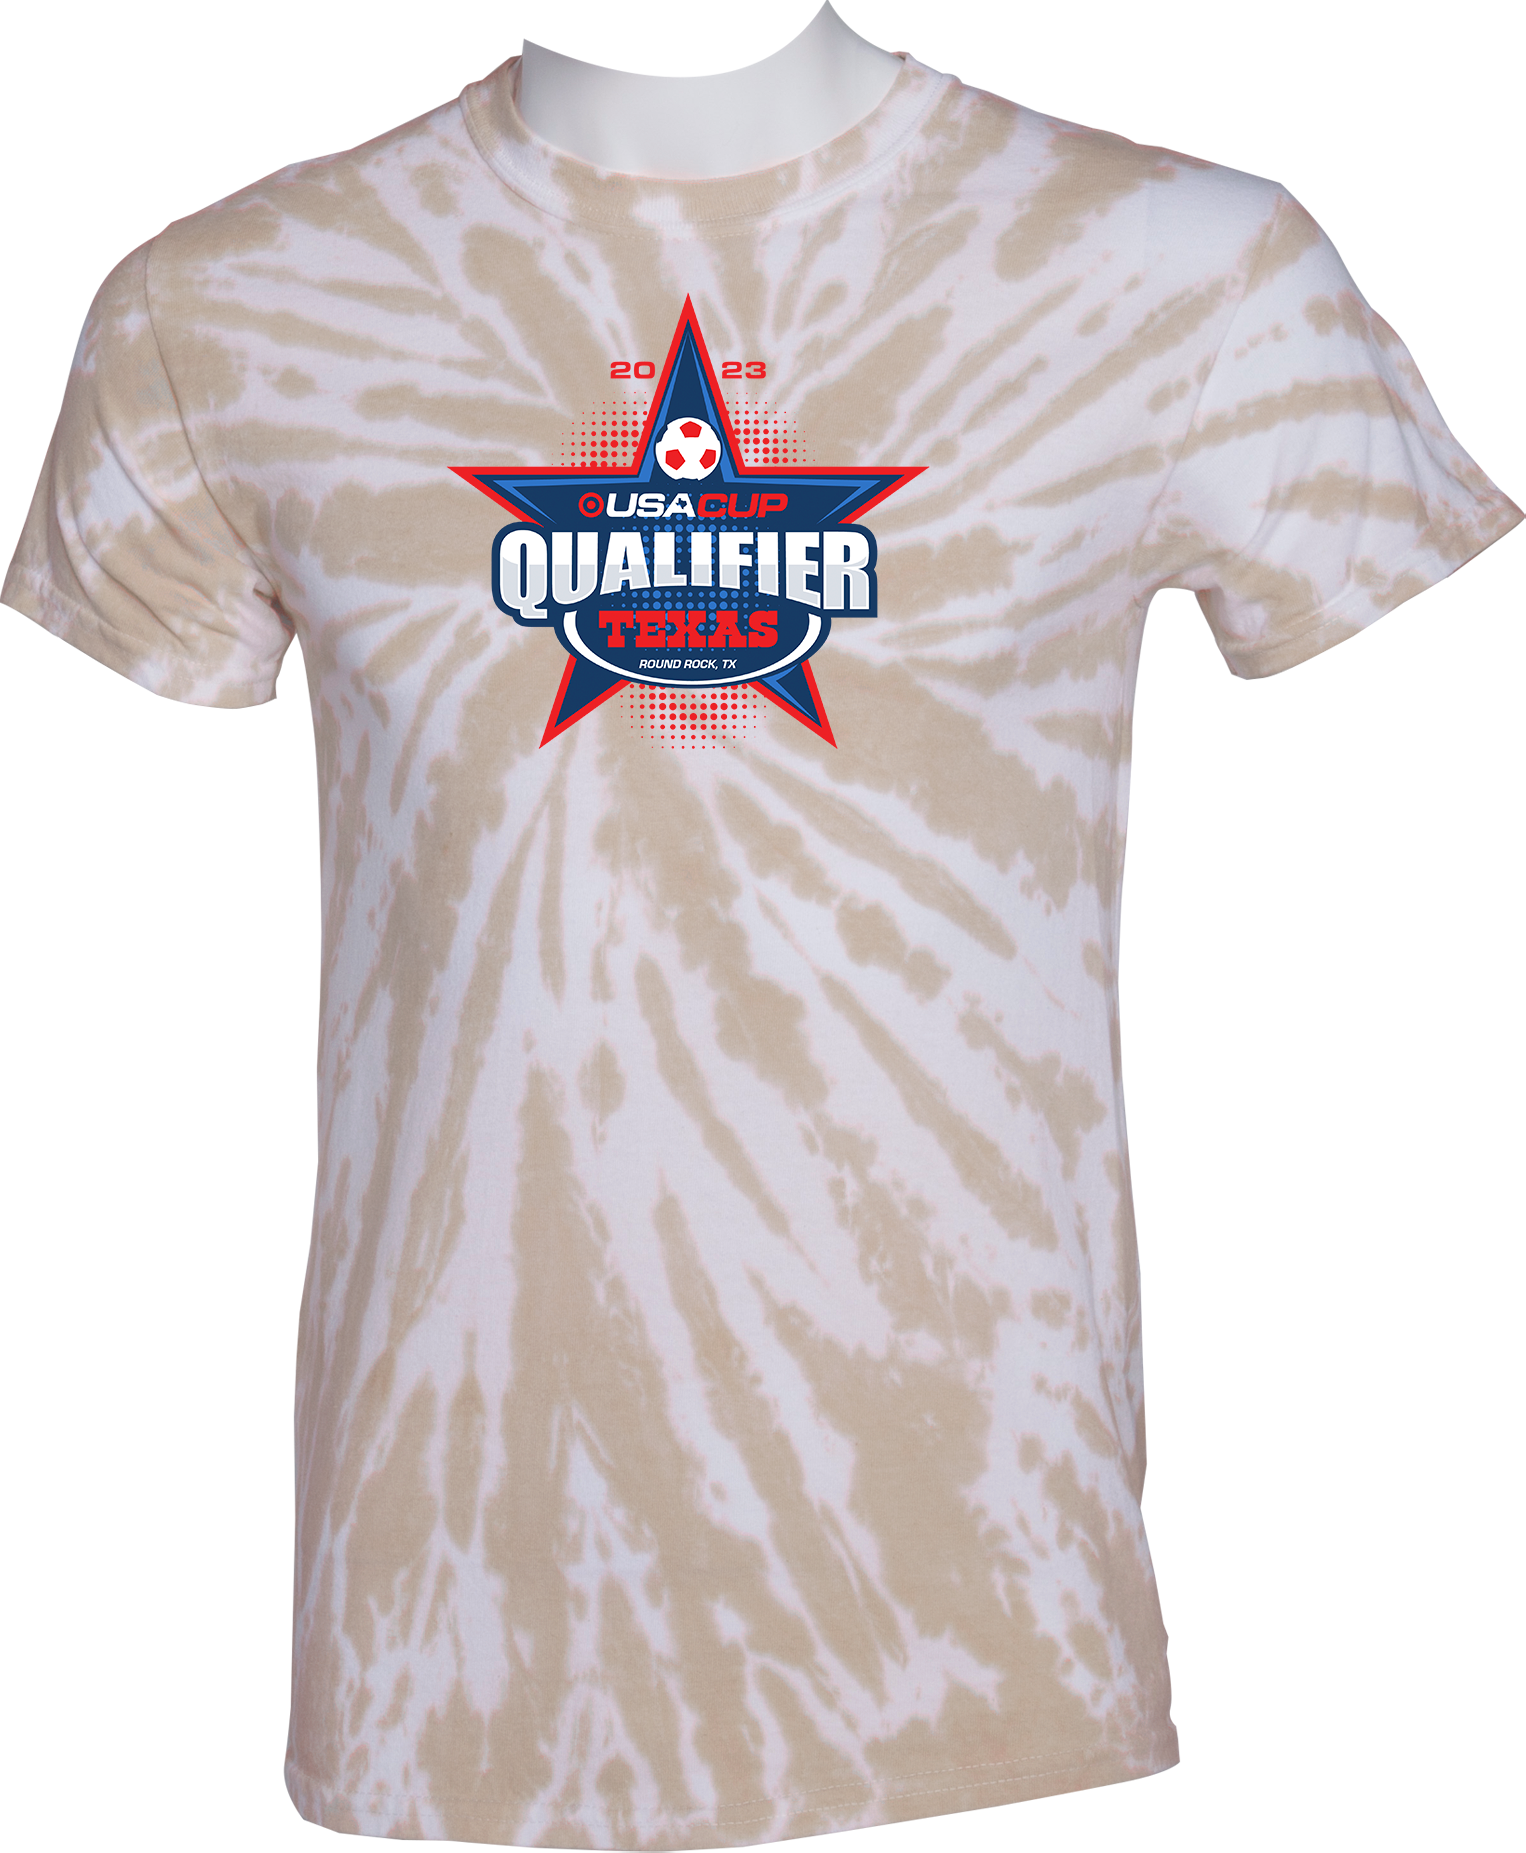 TIE-DYE SHORT SLEEVES - 2023 USA CUP Qualifier Texas